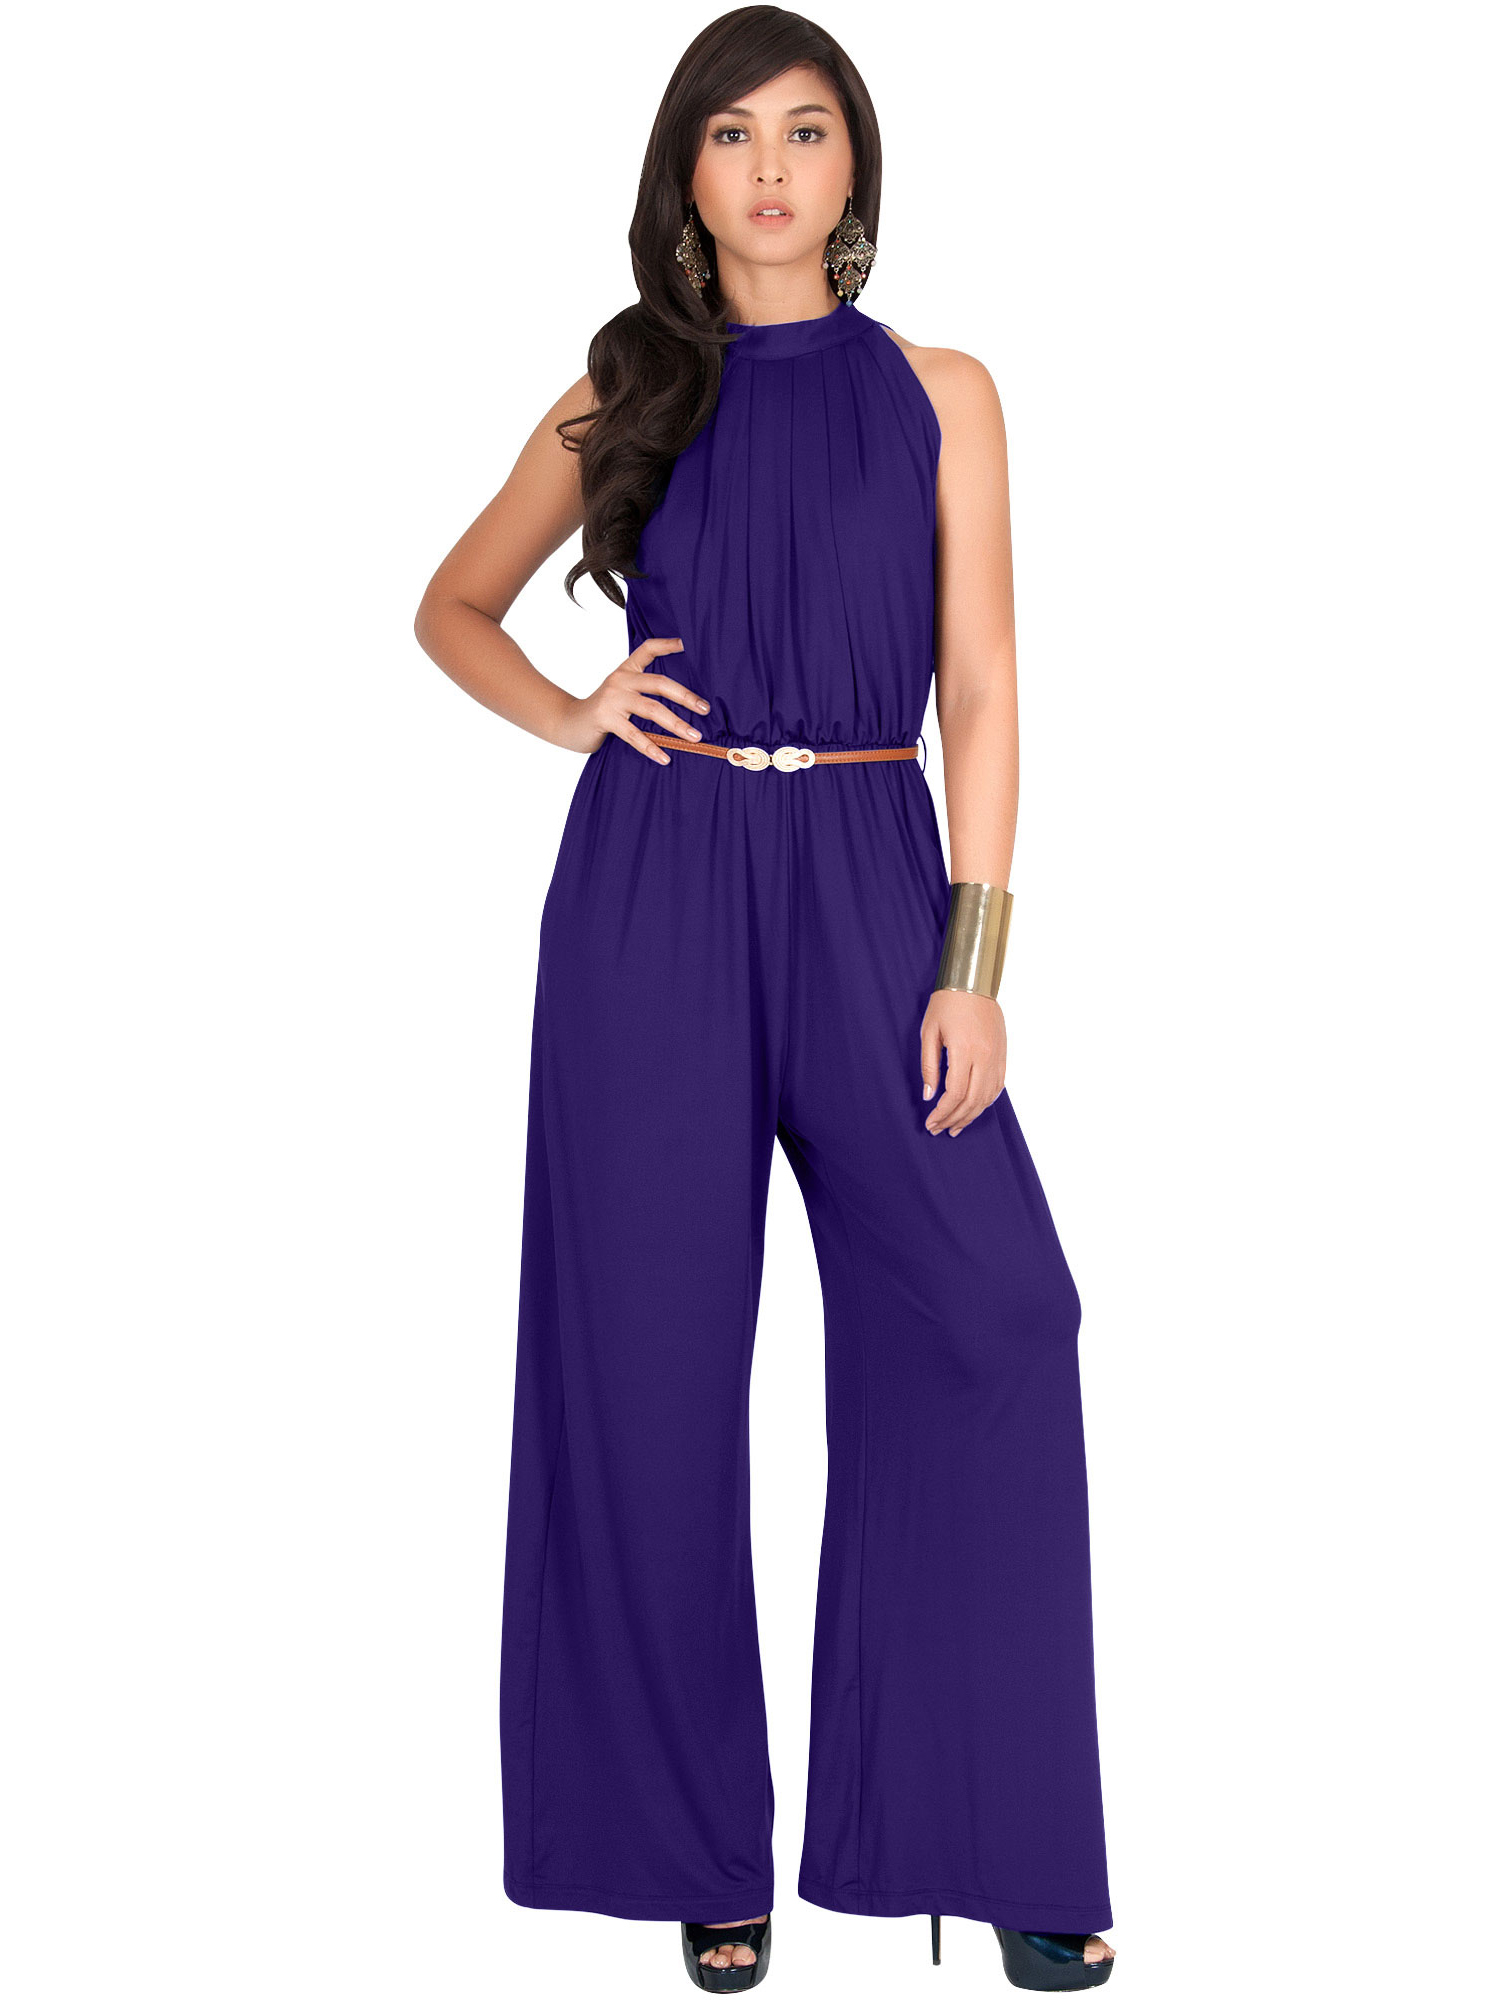 KOH KOH Long Pants Jumpsuit Formal One Piece Cocktail Evening Fall Dressy  Pantsuit Romper Workwear Casual Outfit Tall Sleeveless Playsuit For Women  Indigo Blue Purple X-Large US 14-16 NT202 - Walmart.com